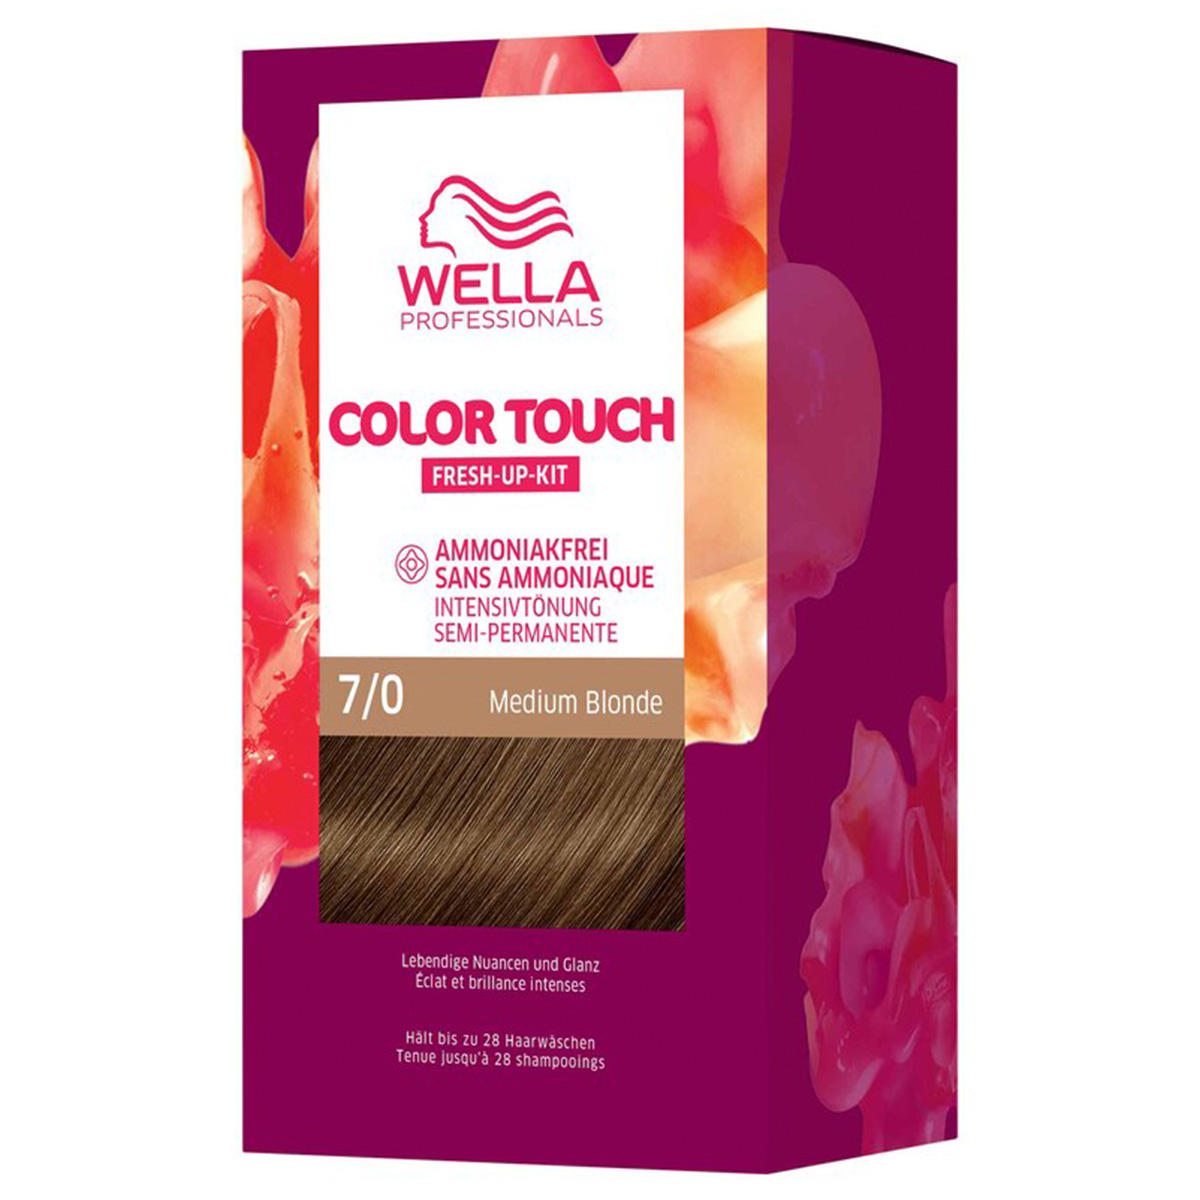 Wella Color Touch Fresh-Up-Kit 7/0 Rubio medio 130 ml - 1